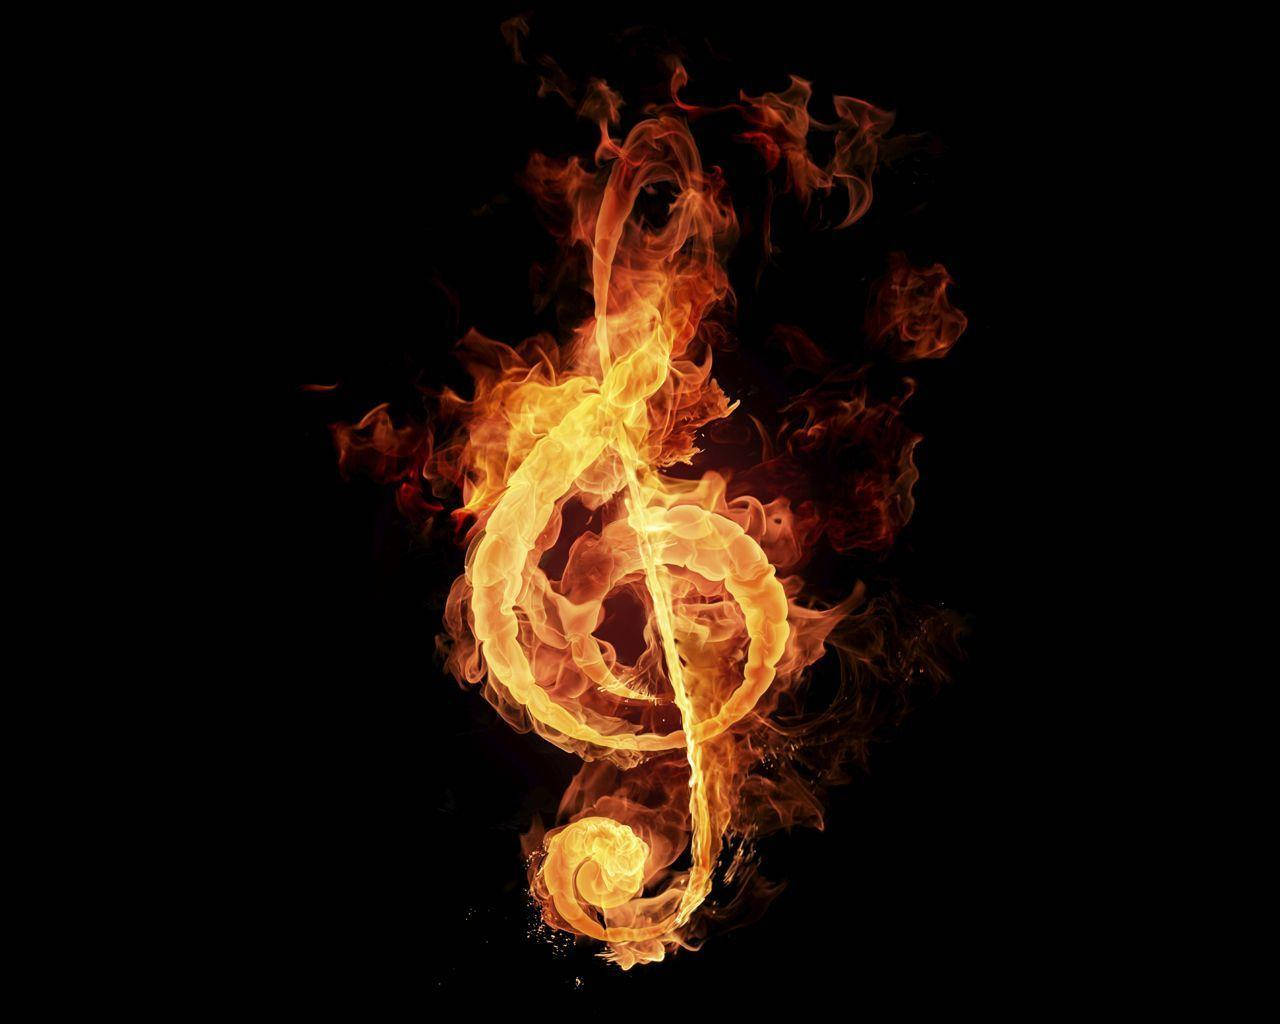 Musical Note Fire Background Wallpaper